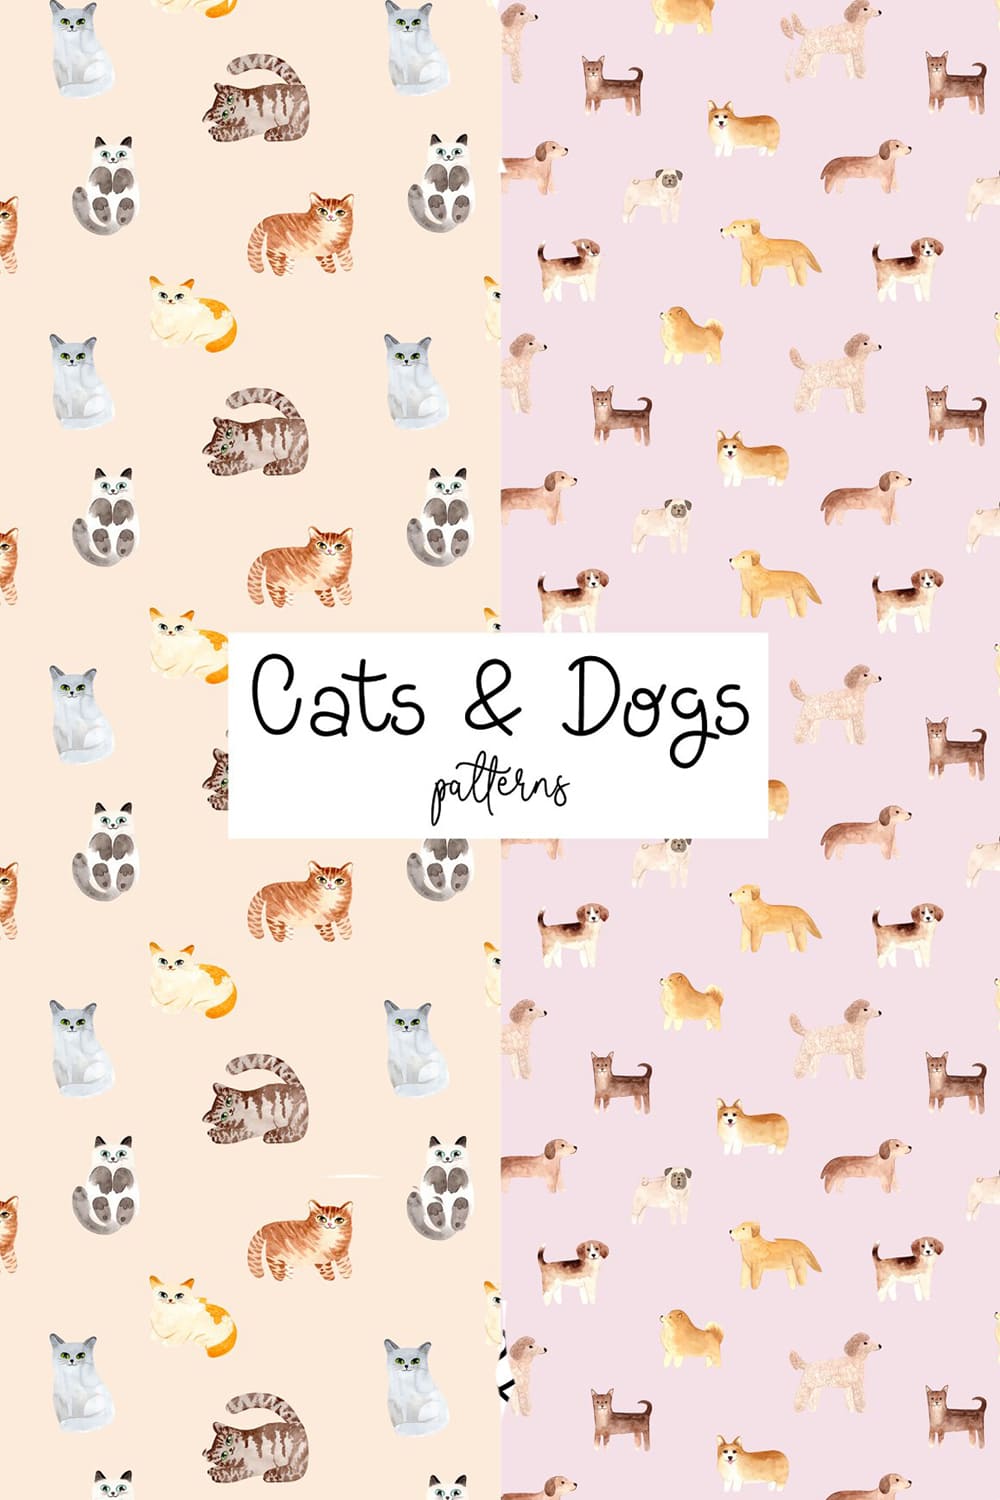 Cats and Dogs Patterns.